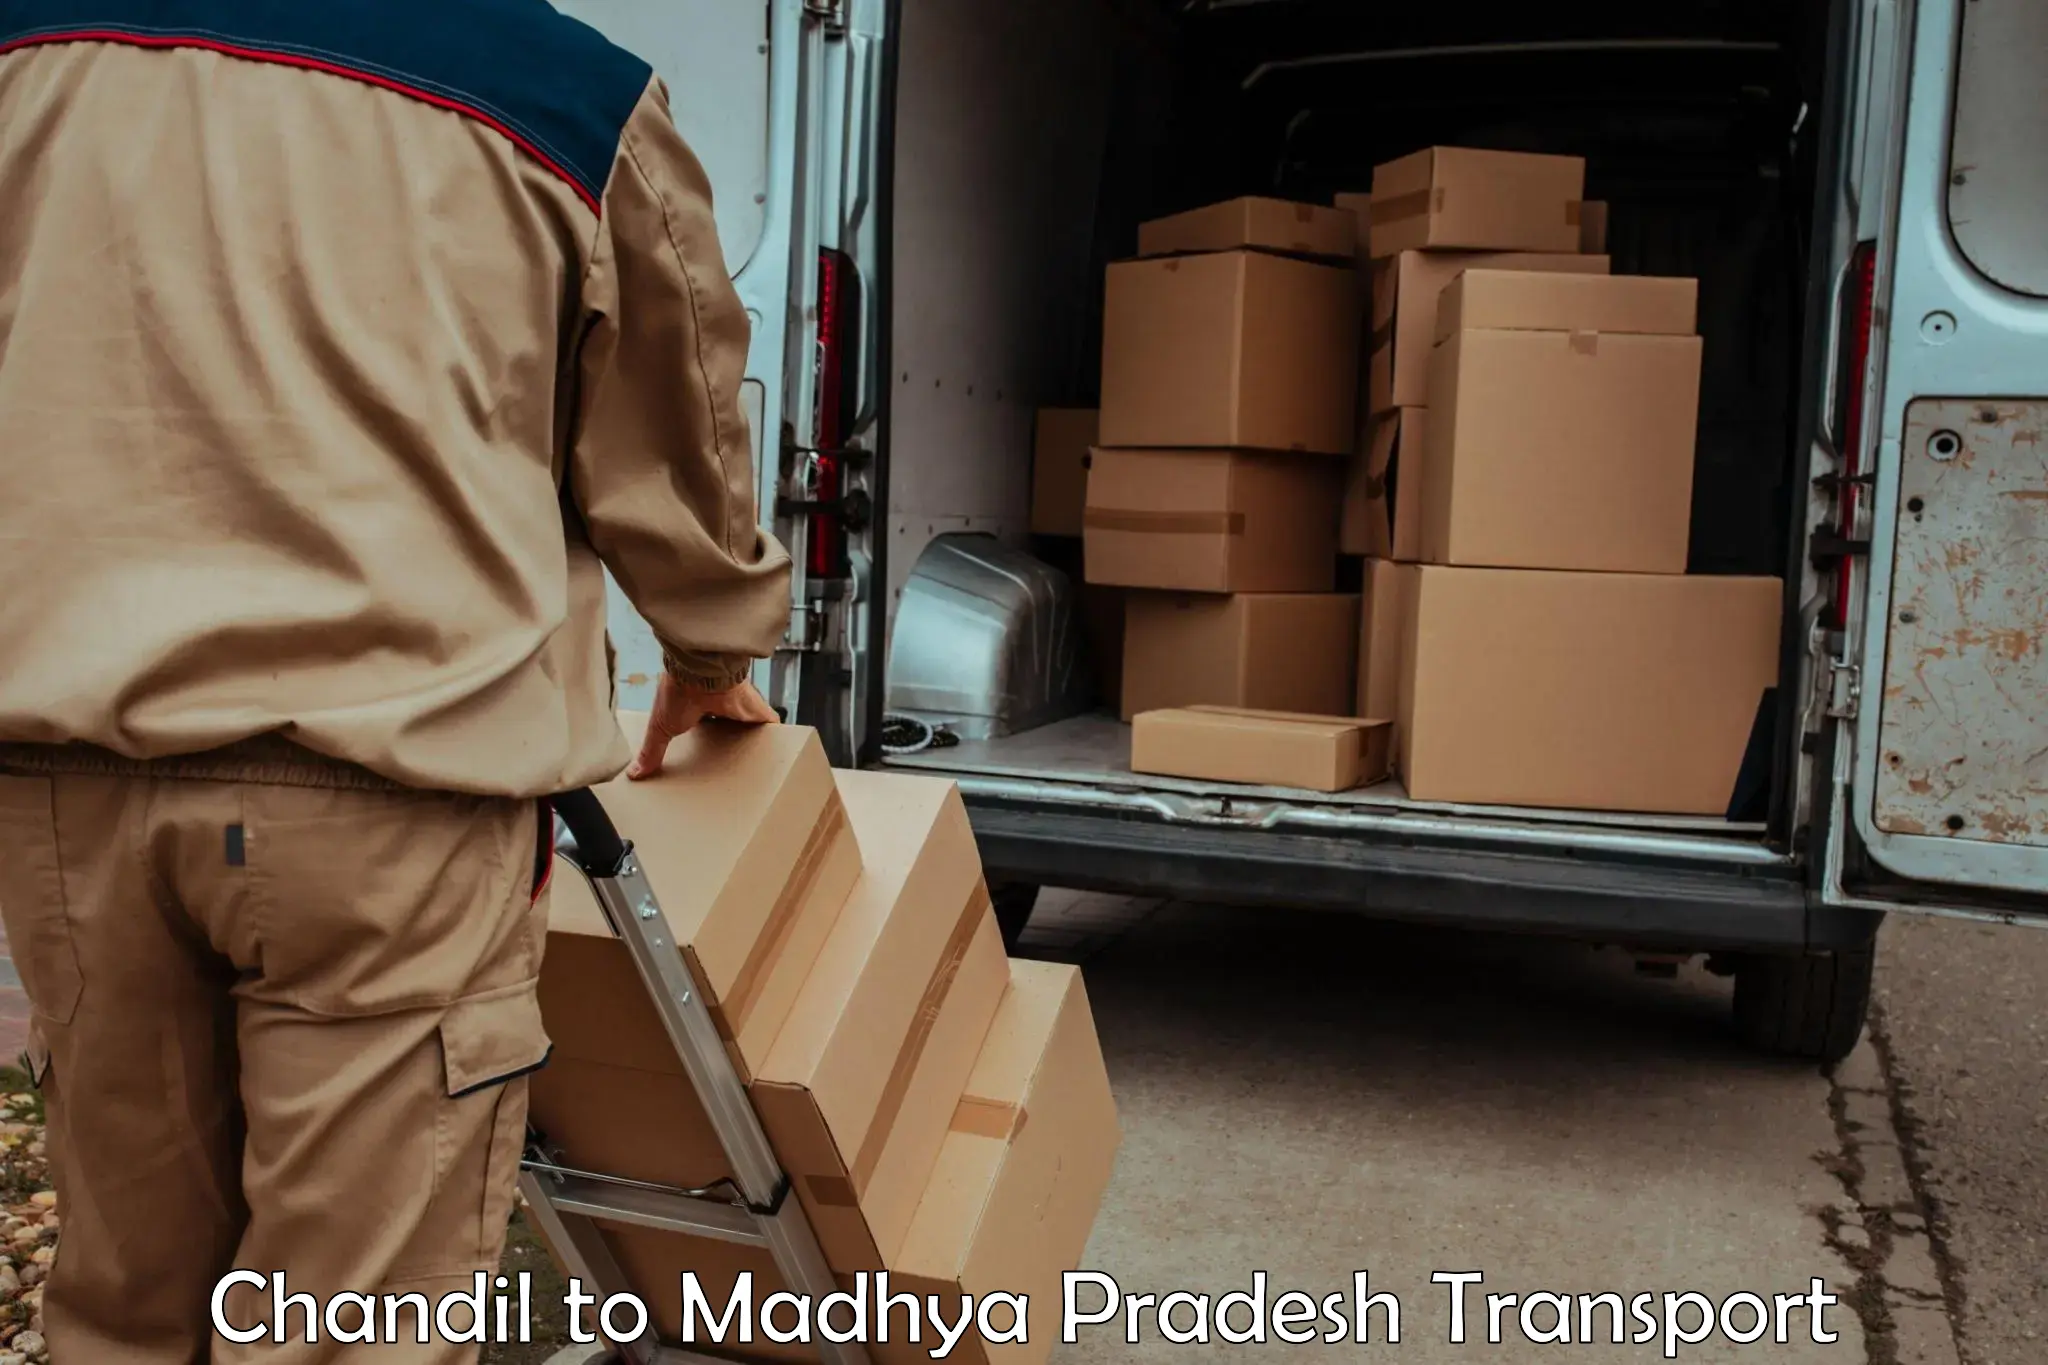 Furniture transport service Chandil to IIT Indore